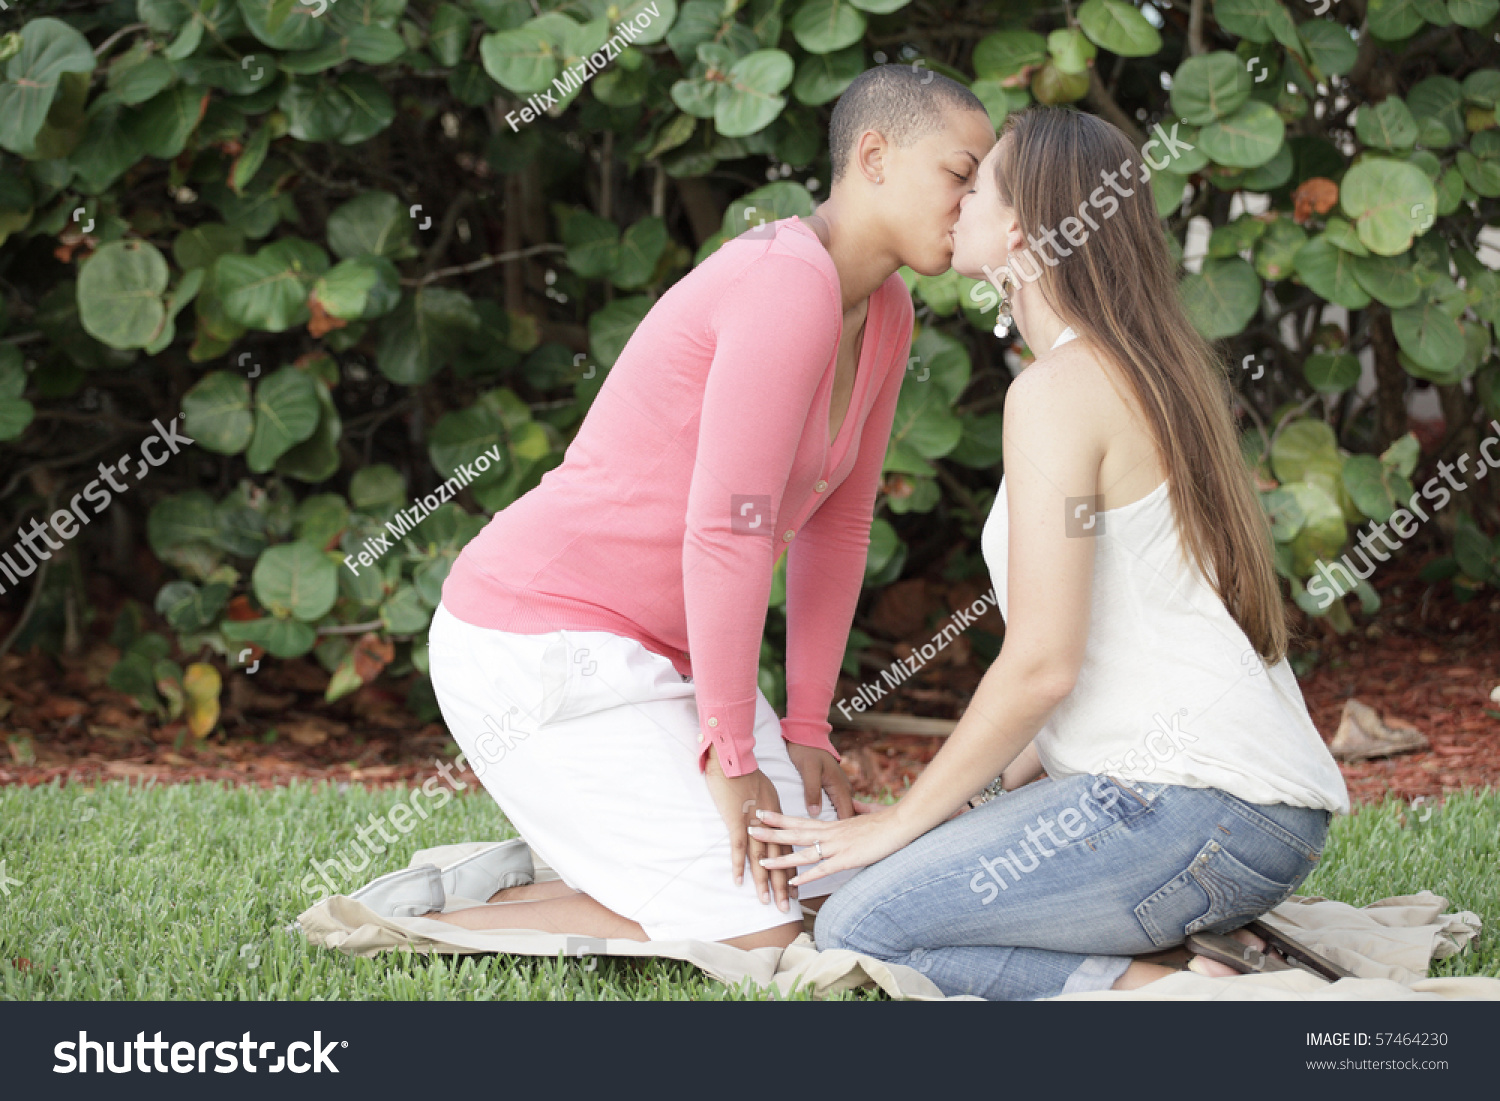 Two Young Women Kissing In The Park Stock Photo 57464230 : Shutterstock